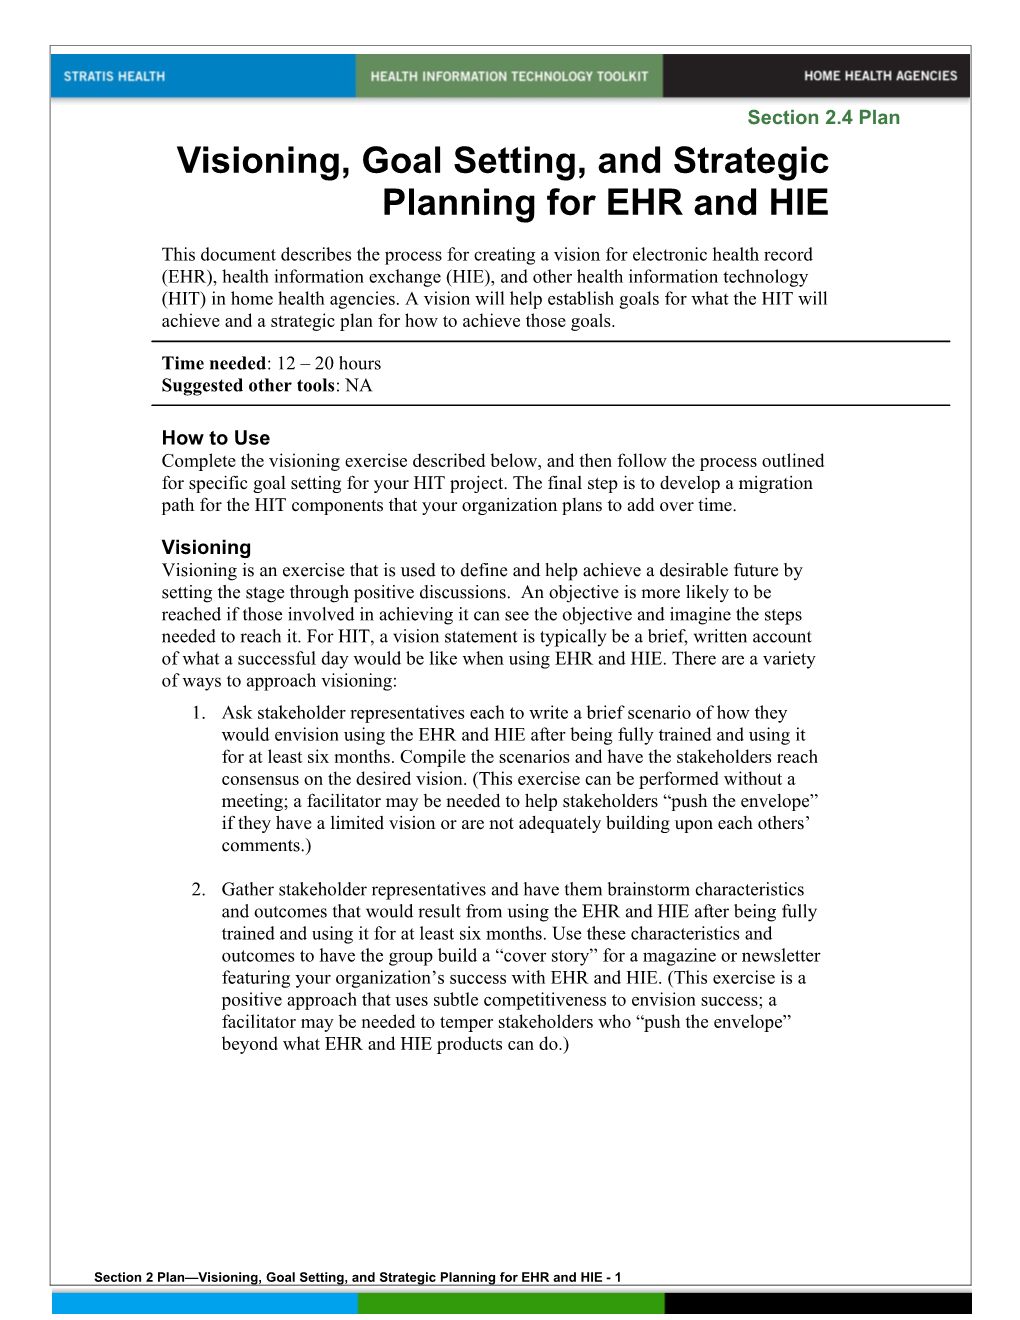 2 Visioning, Goal Setting, and Strategic Planning for EHR and HIE